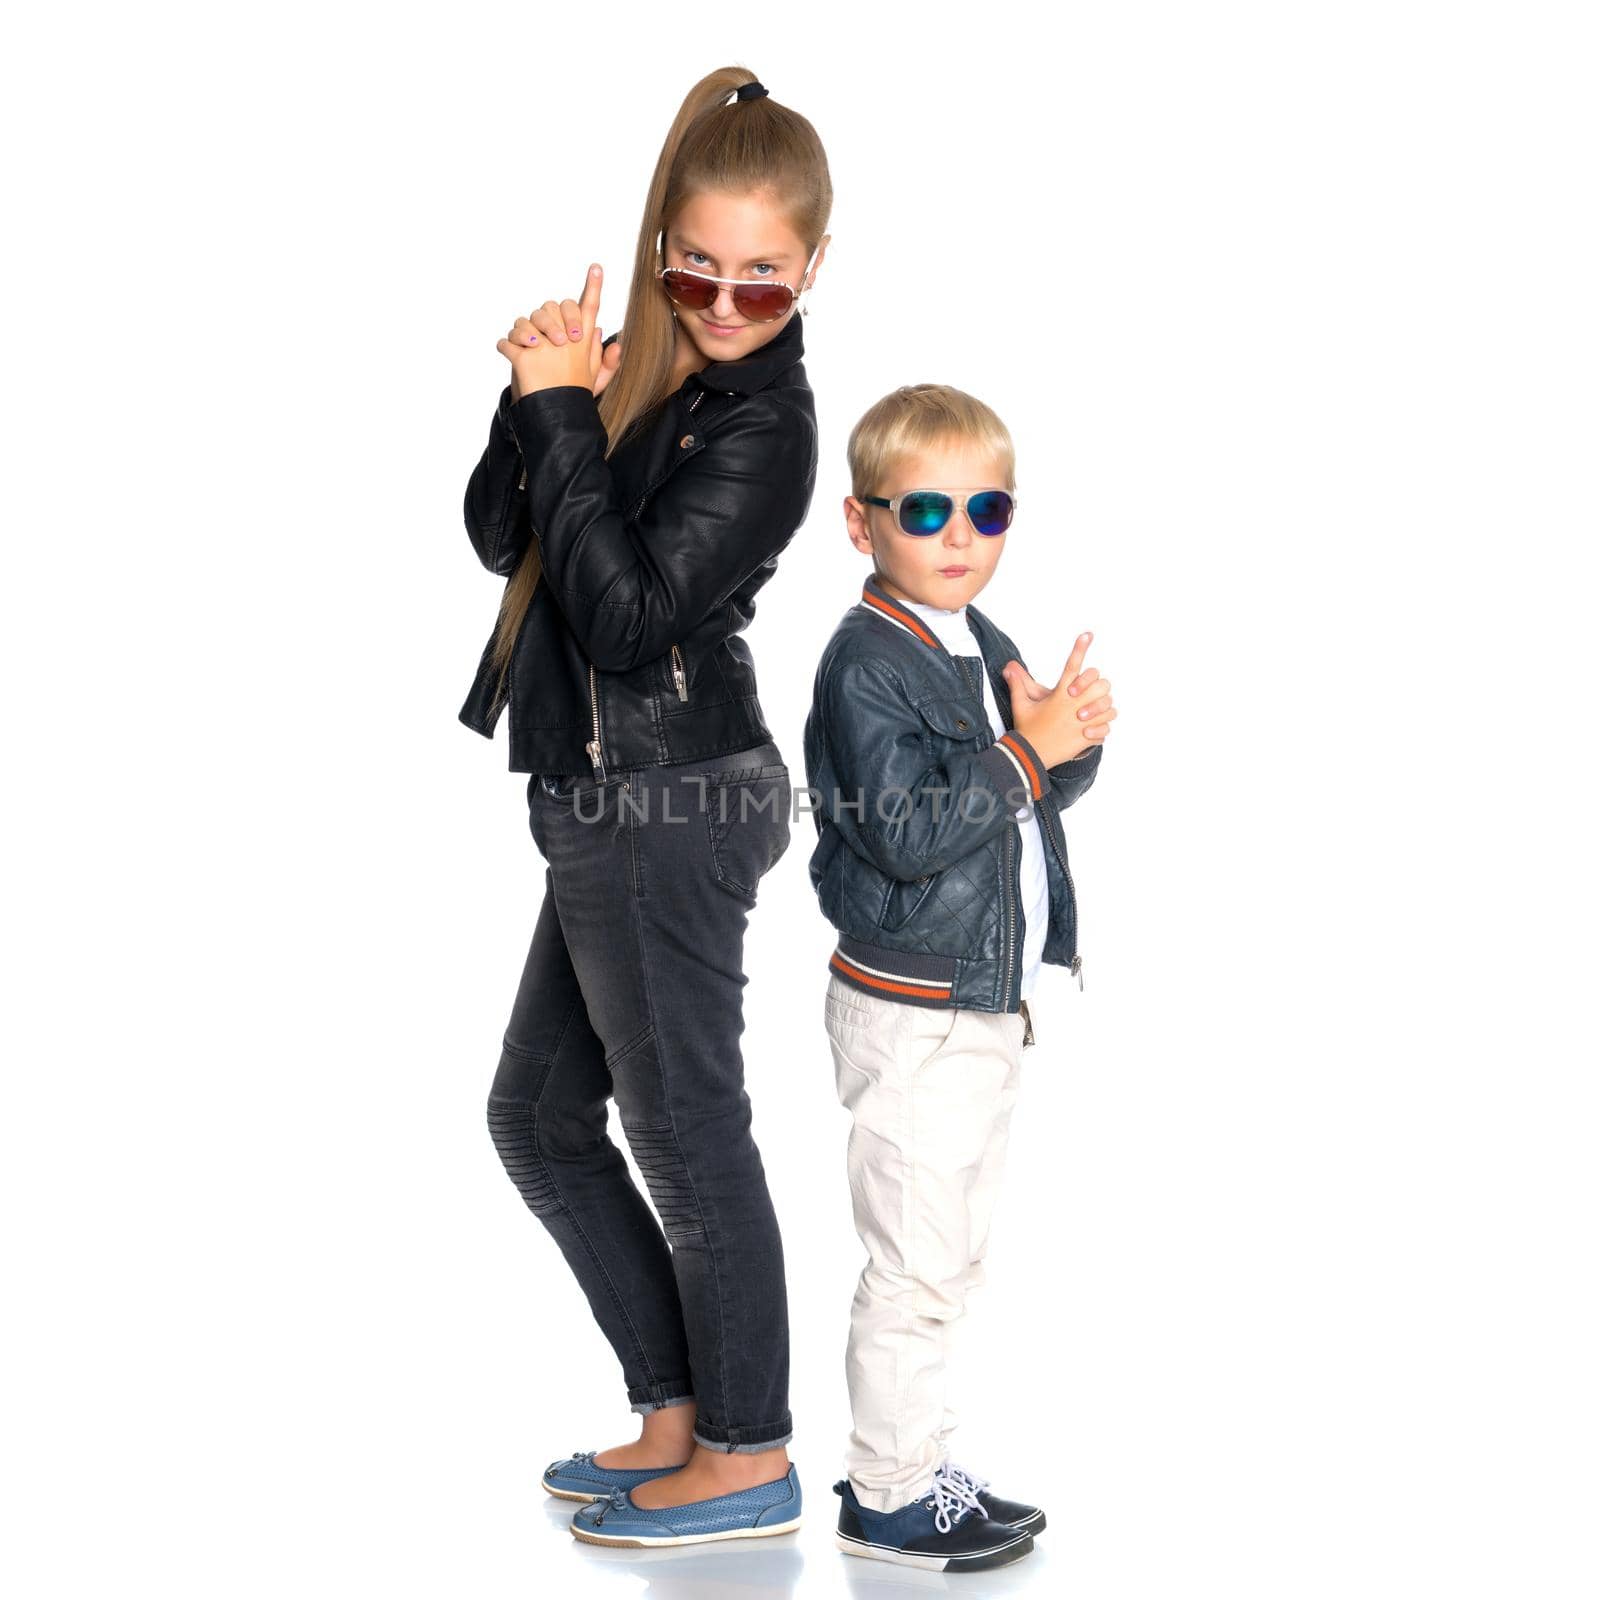 A teenage girl with her younger brother. studio photo session. The concept of family happiness.Isolated on white background.